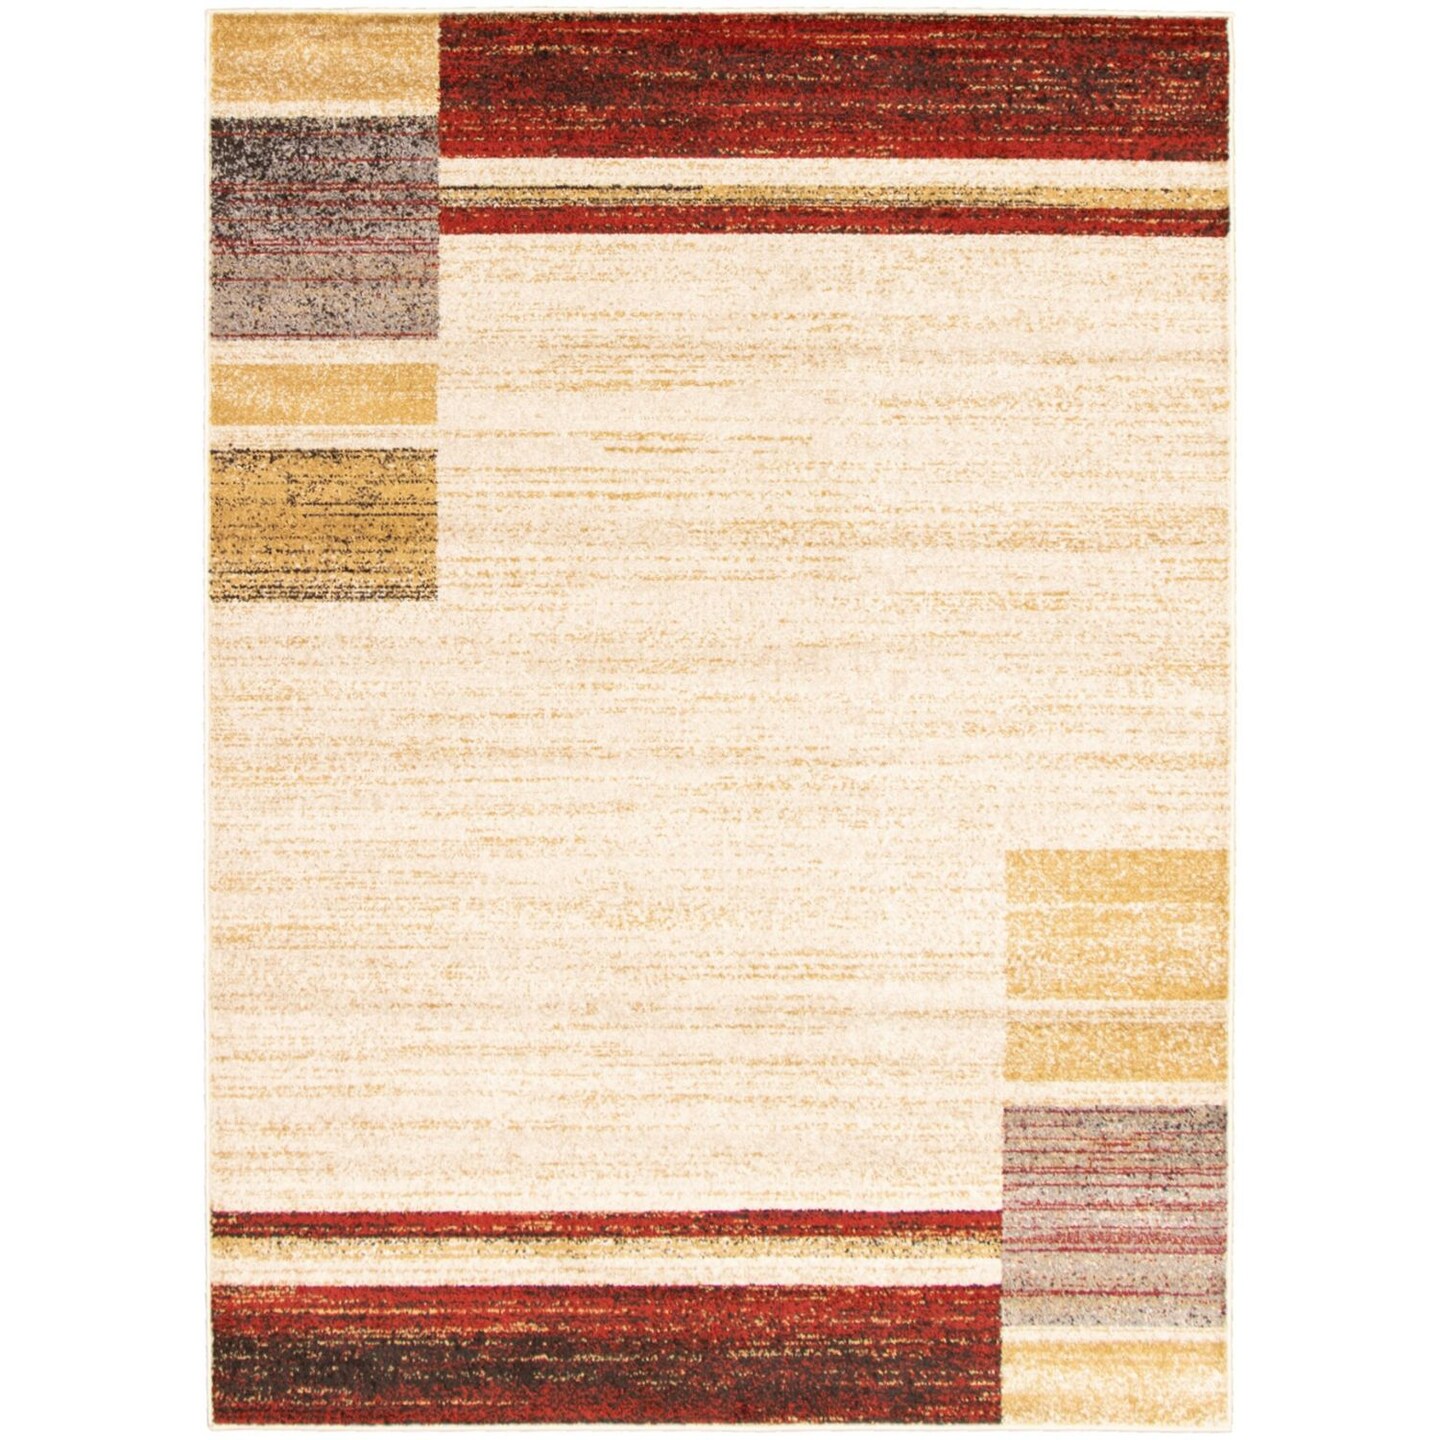 Chaudhary Living Abstract Rectangular Area Throw Rug - 7.75&#x27; x 10&#x27; - Beige and Gold